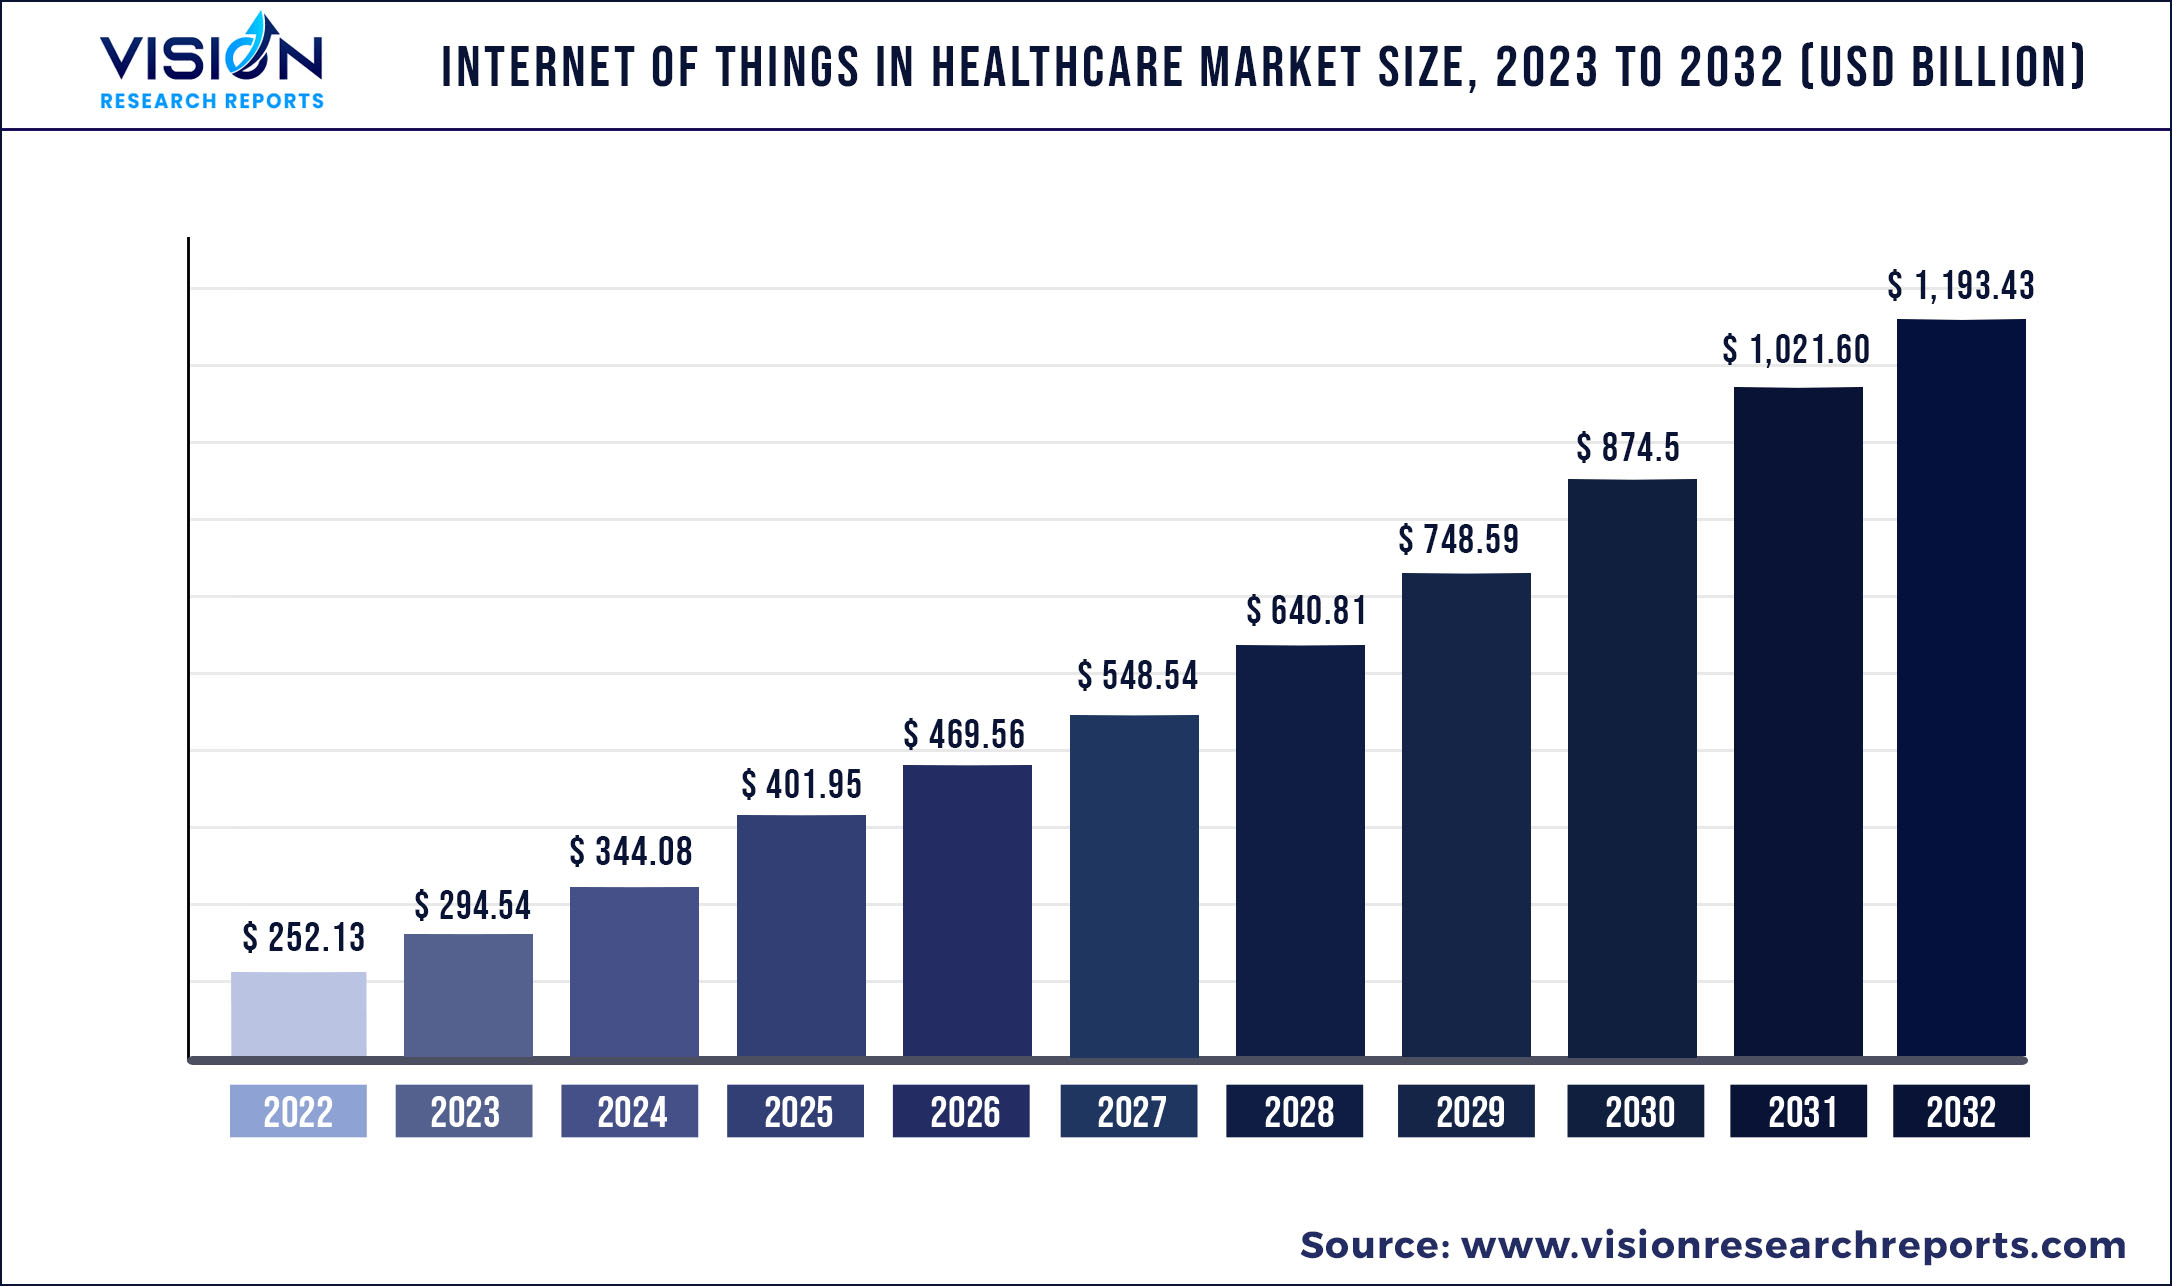 Internet of Things in Healthcare Market Size 2023 to 2032